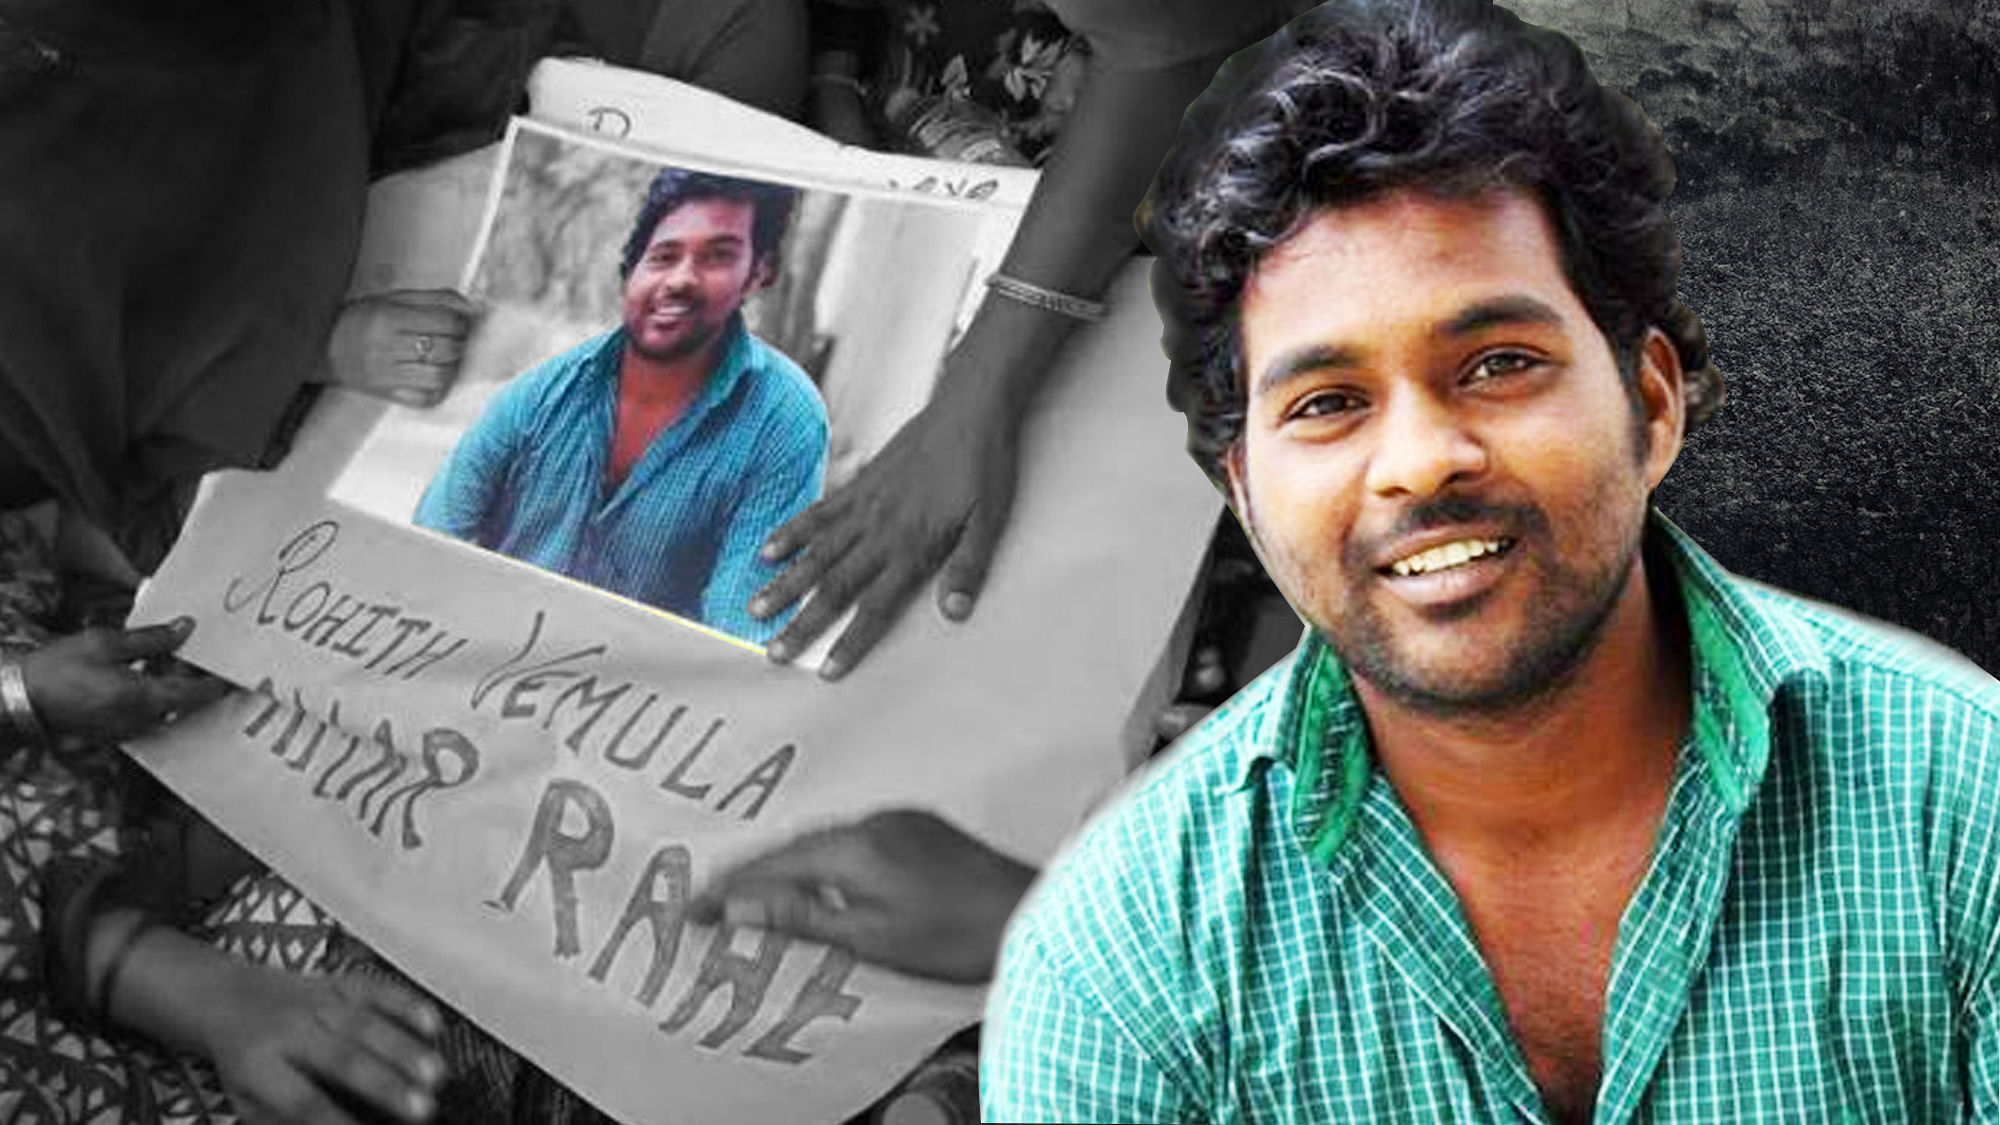 The police is awaiting legal opinion in Vemula’s case, after getting a report from the revenue authorities that he did not belong to an SC community.